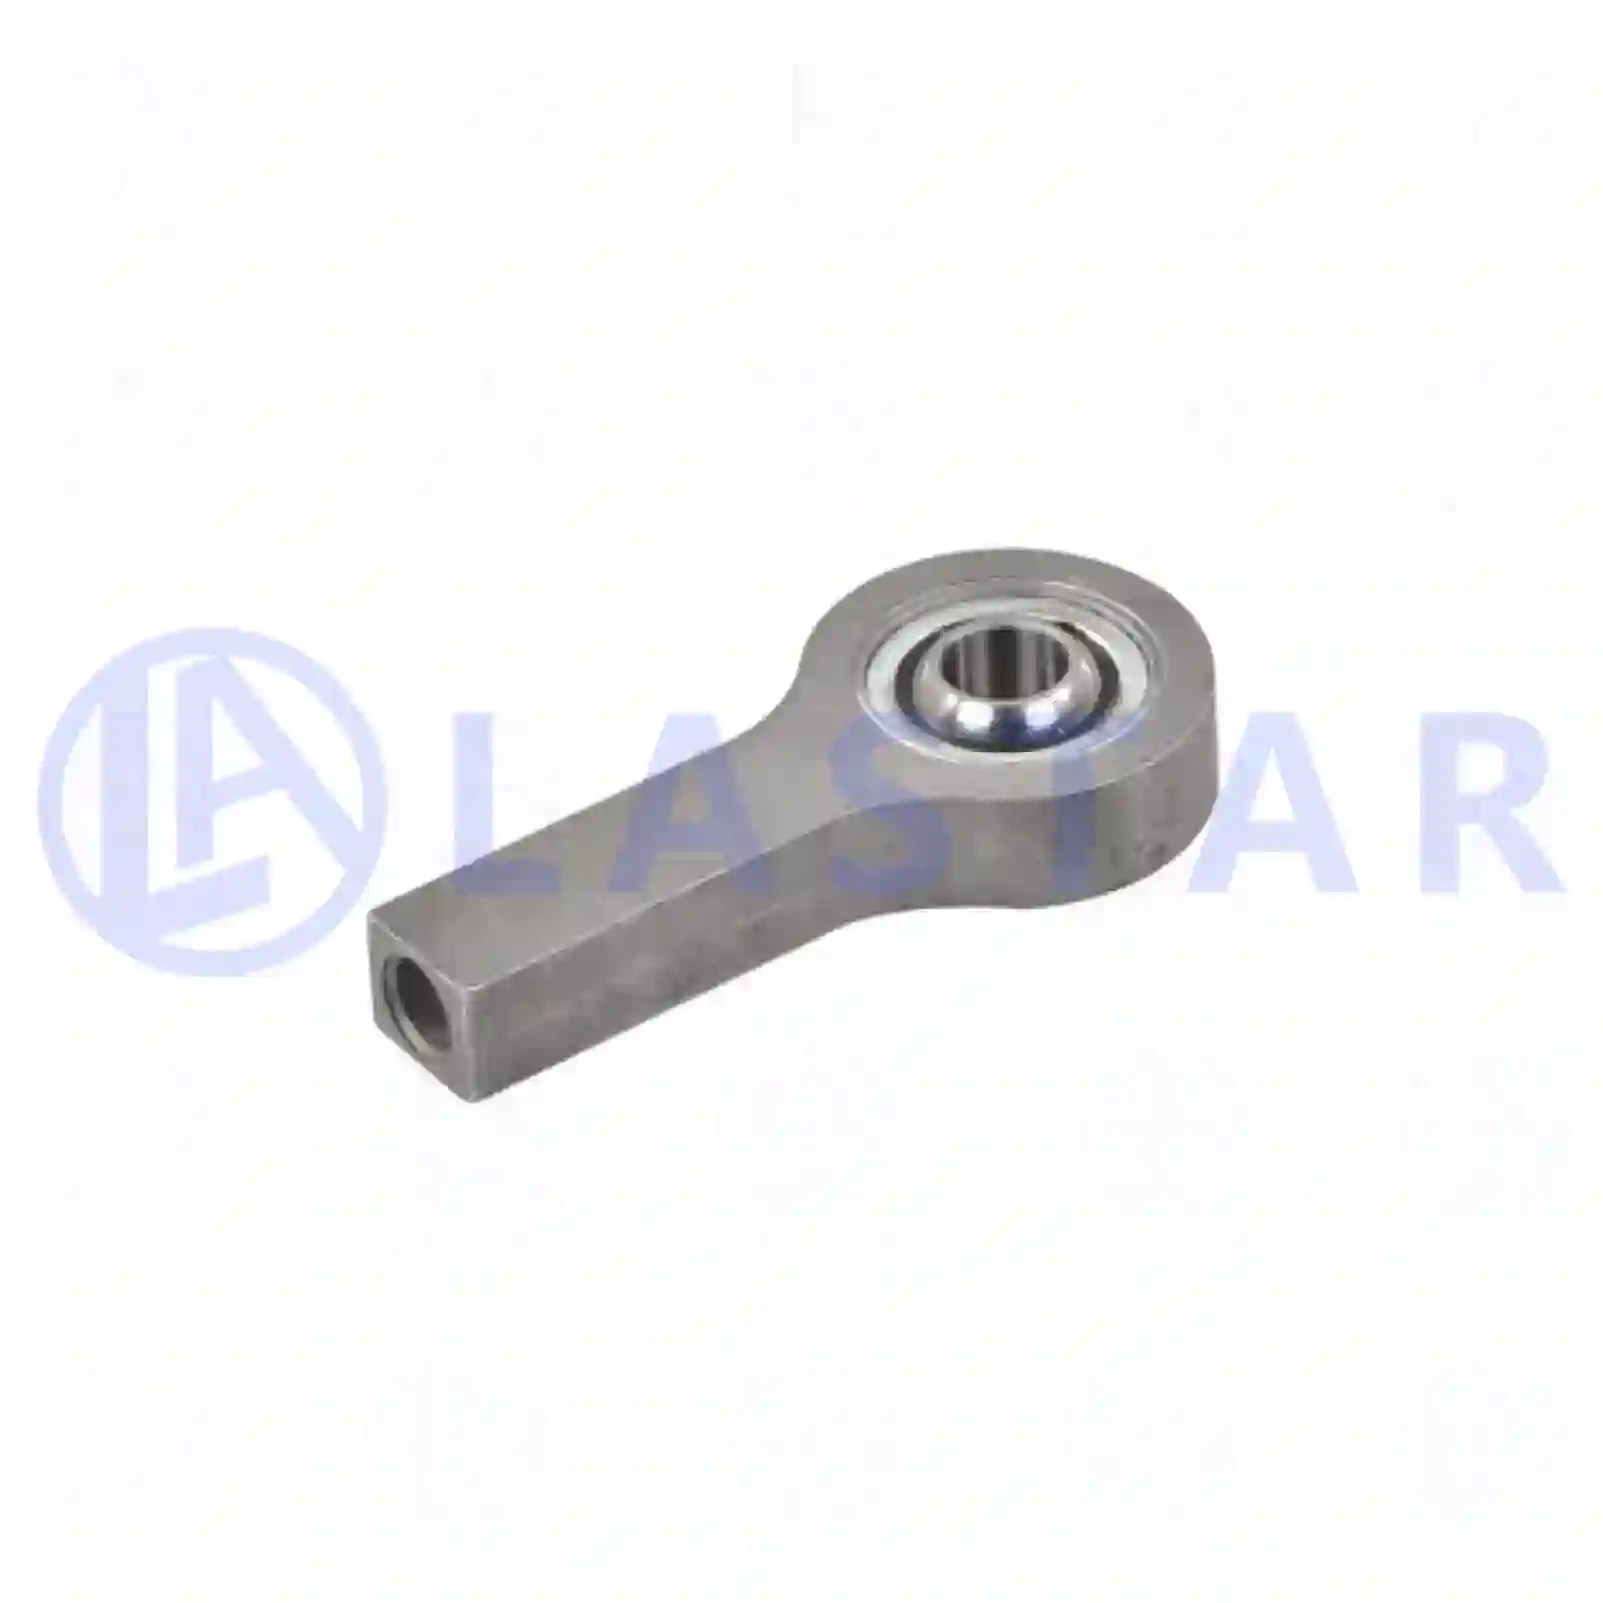 Bearing joint, cabin shock absorber, 77735916, 1426202, 1744211, ZG40852-0008 ||  77735916 Lastar Spare Part | Truck Spare Parts, Auotomotive Spare Parts Bearing joint, cabin shock absorber, 77735916, 1426202, 1744211, ZG40852-0008 ||  77735916 Lastar Spare Part | Truck Spare Parts, Auotomotive Spare Parts